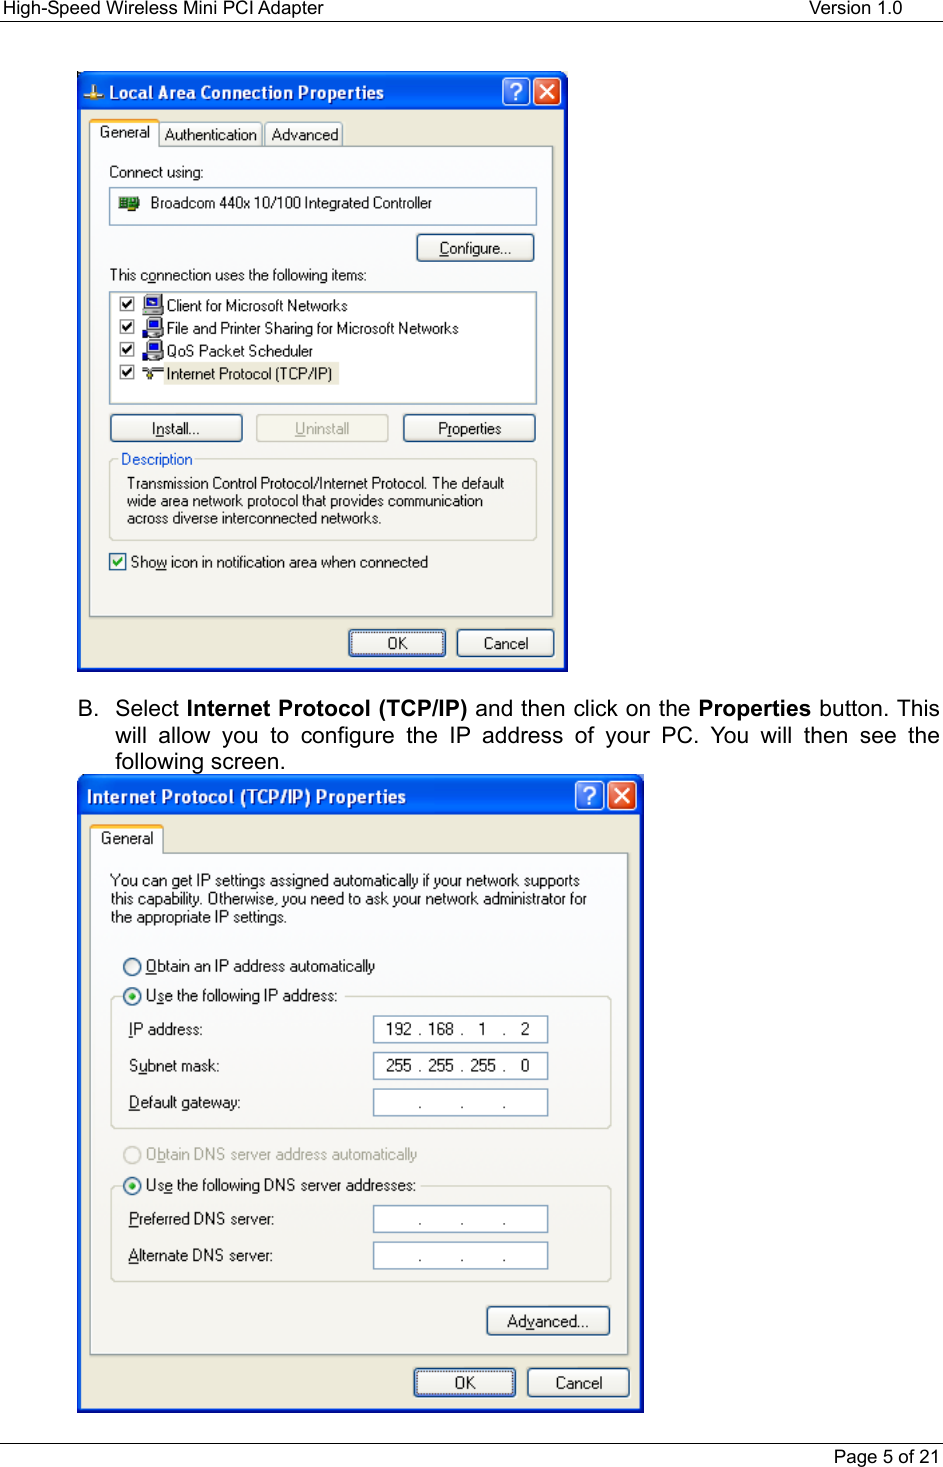 High-Speed Wireless Mini PCI Adapter Version 1.0Page 5 of 21B. Select Internet Protocol (TCP/IP) and then click on the Properties button. Thiswill allow you to configure the IP address of your PC. You will then see thefollowing screen.